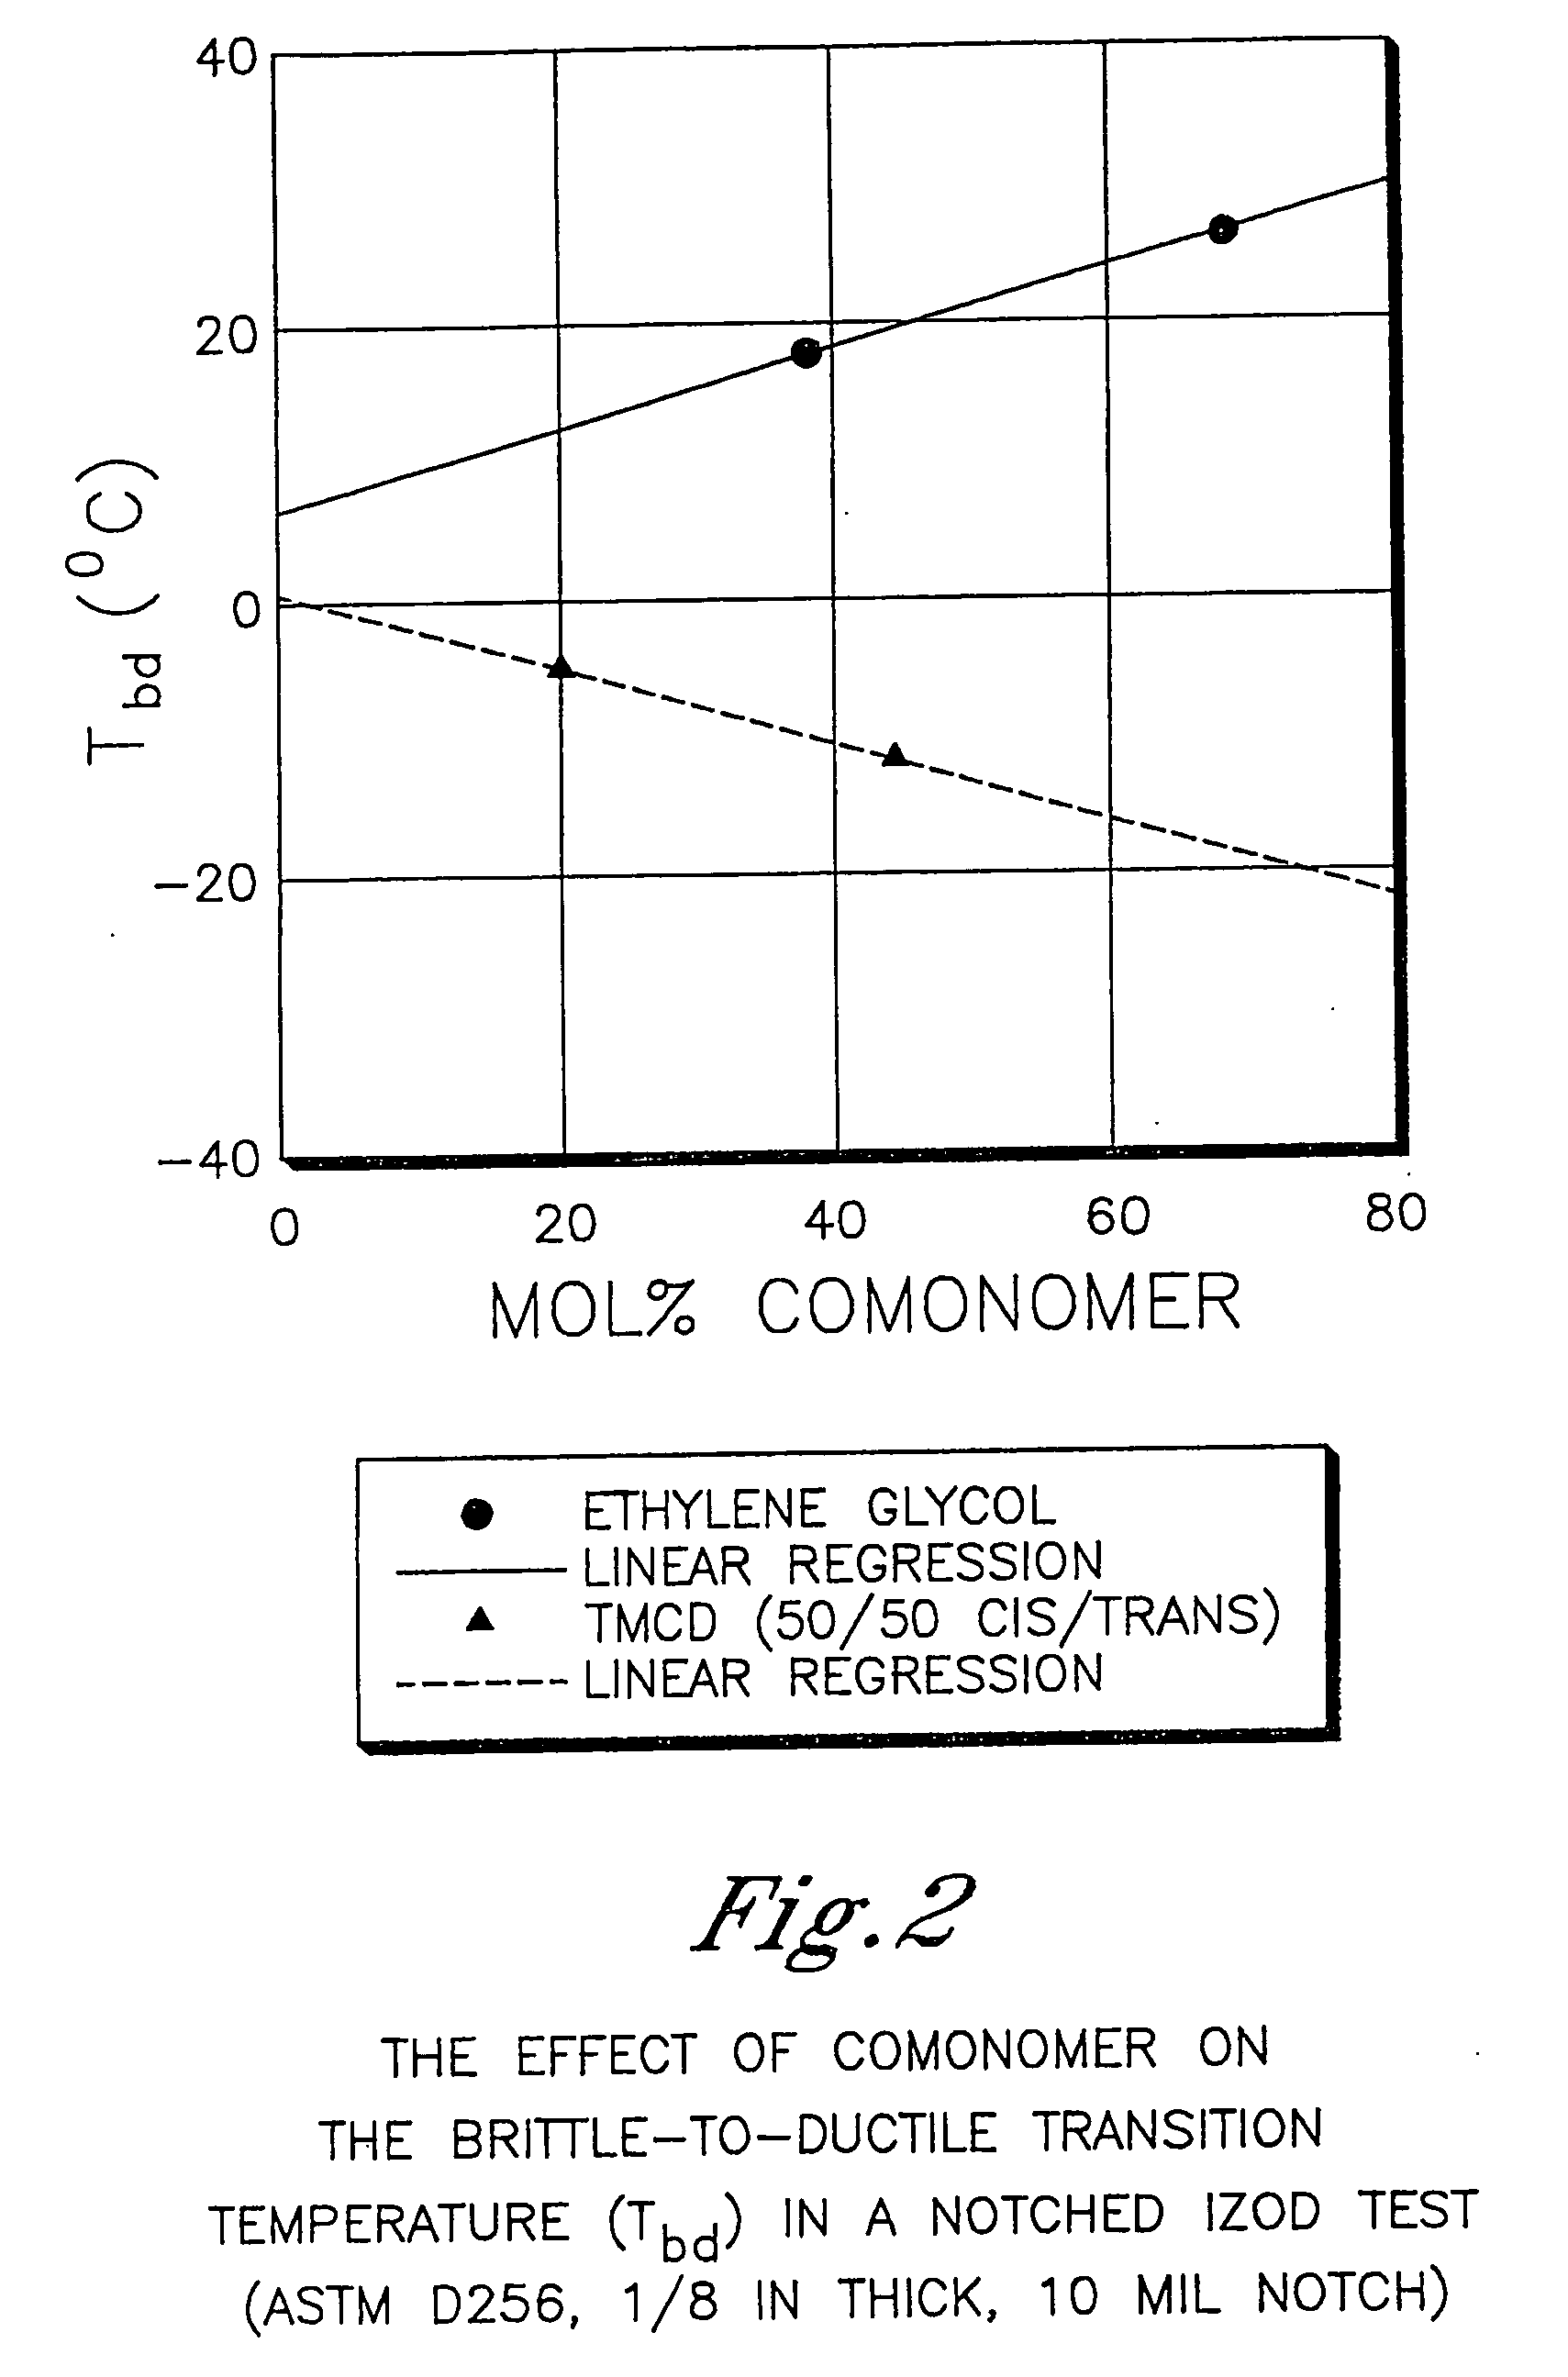 Food service products comprising polyester compositions formed from 2,2,4,4-tetramethyl-1,3-cyclobutanediol and 1,4-cyclohexanedimethanol